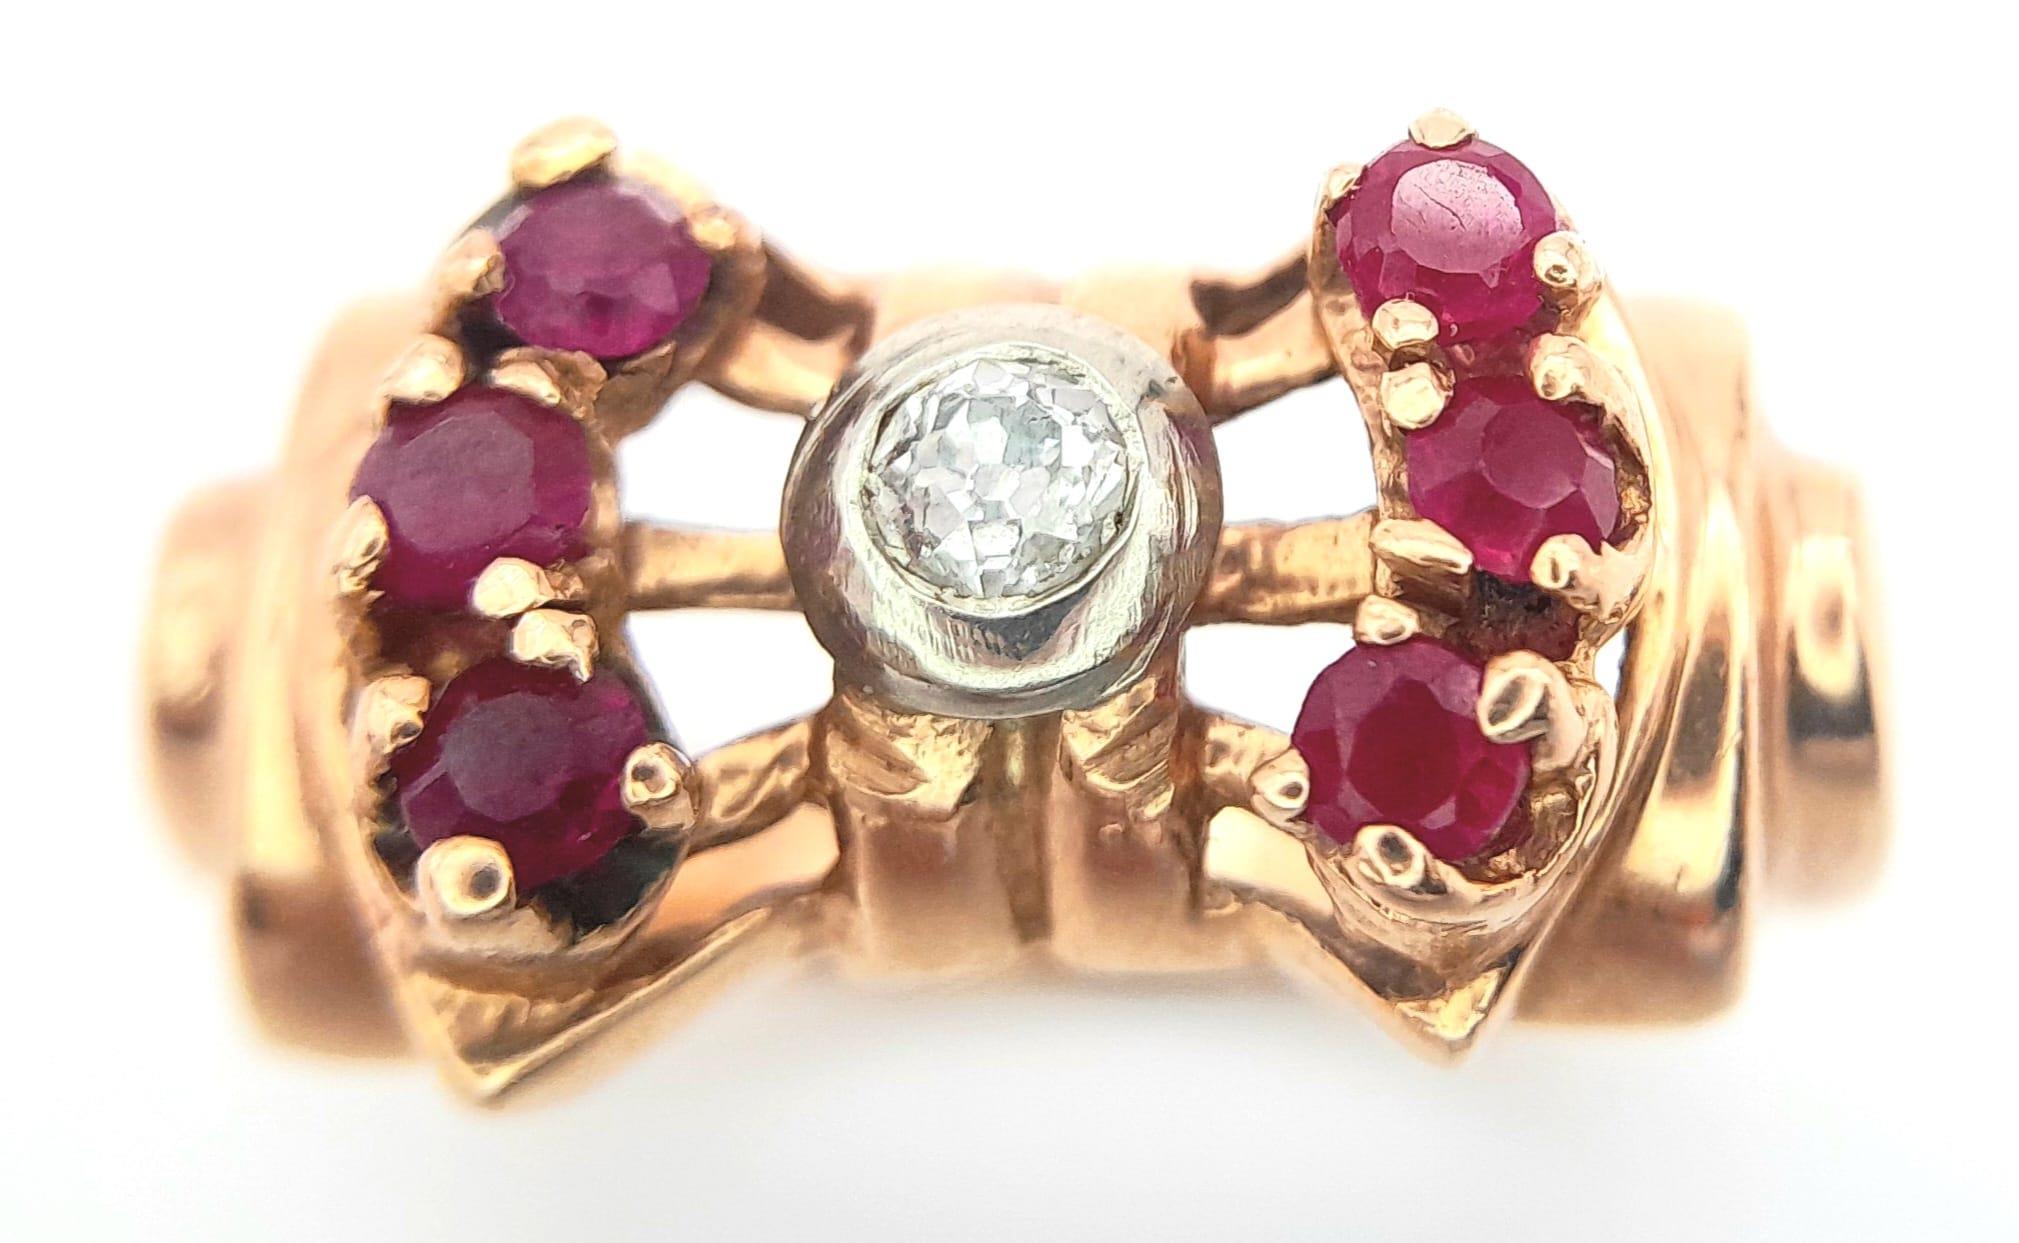 A 14K ROSE GOLD DESIGNER RING WITH CENTRAL DIAMOND FLANKED BY RUBIES . 8.1gms size L - Image 4 of 7